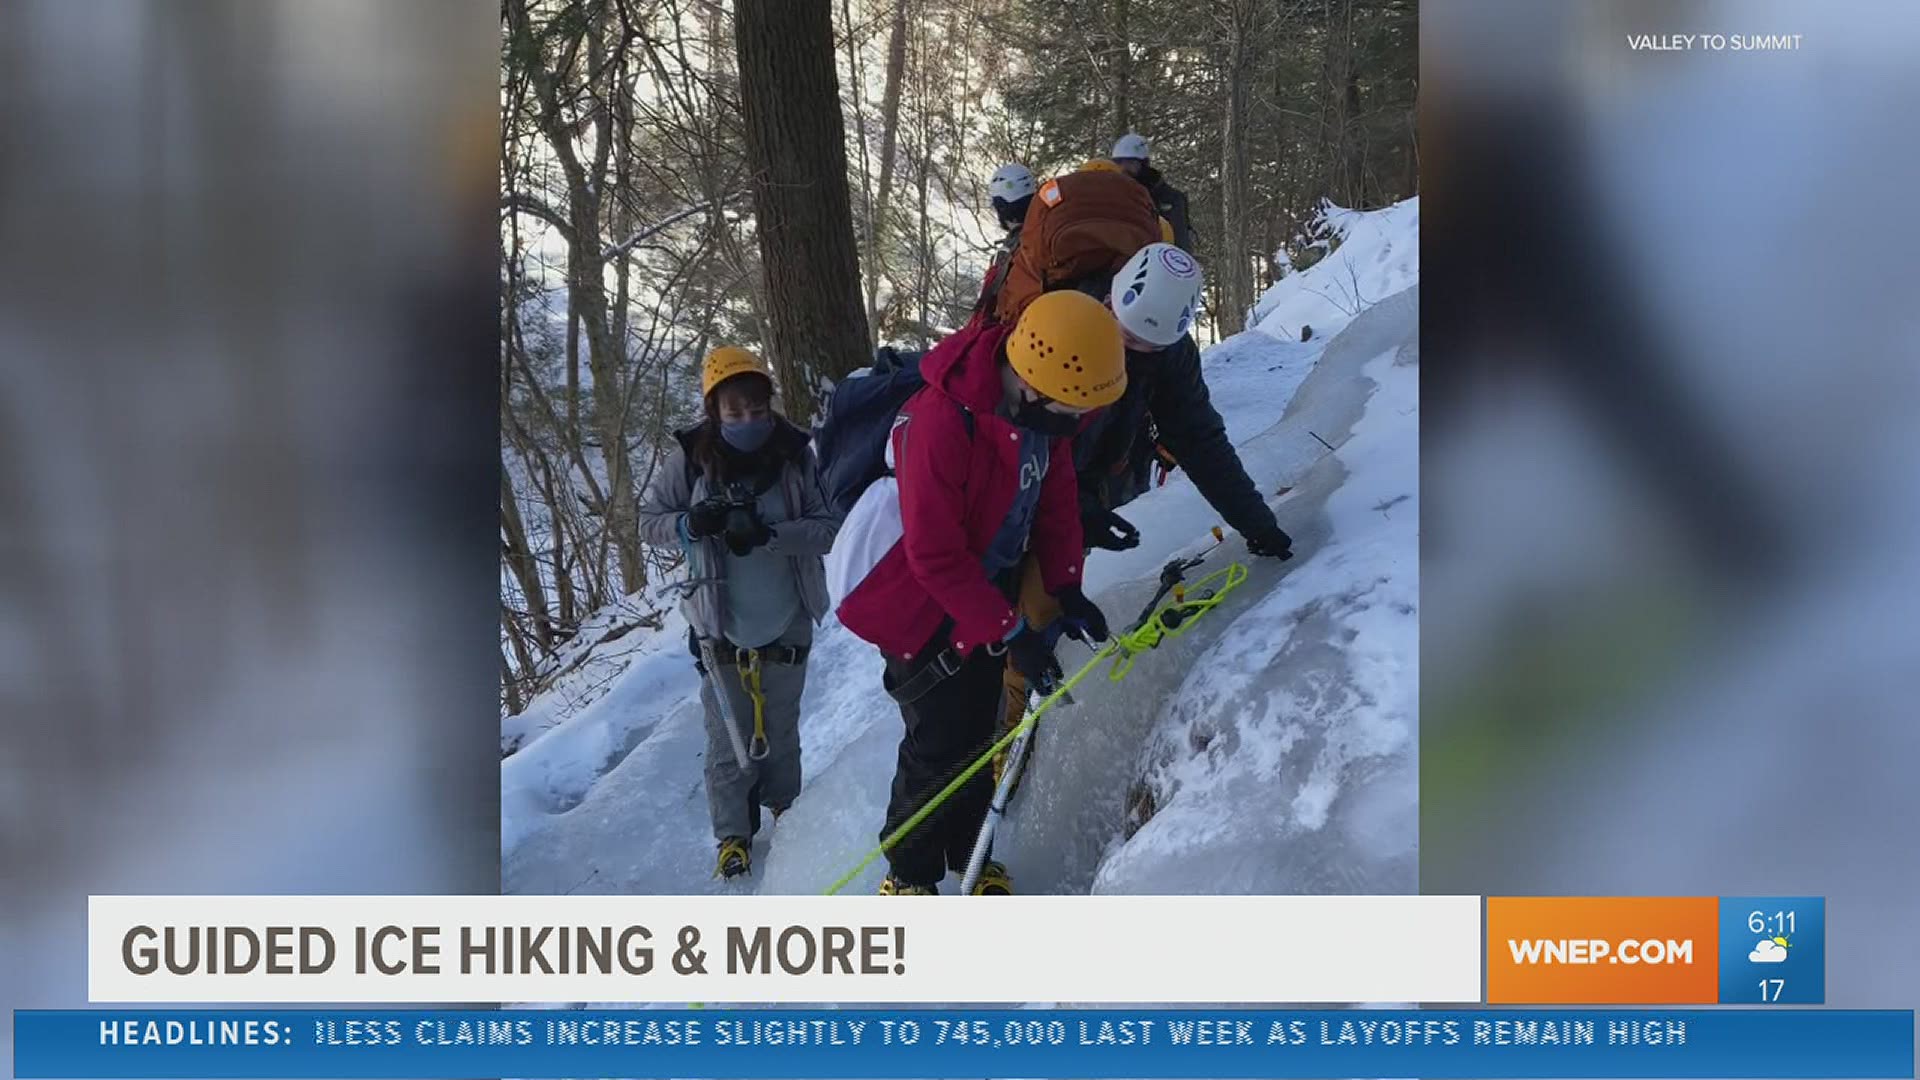 Looking to spice up your outdoor adventures in our area or learn something new while in nature? Guided hikes are gaining popularity during the pandemic.